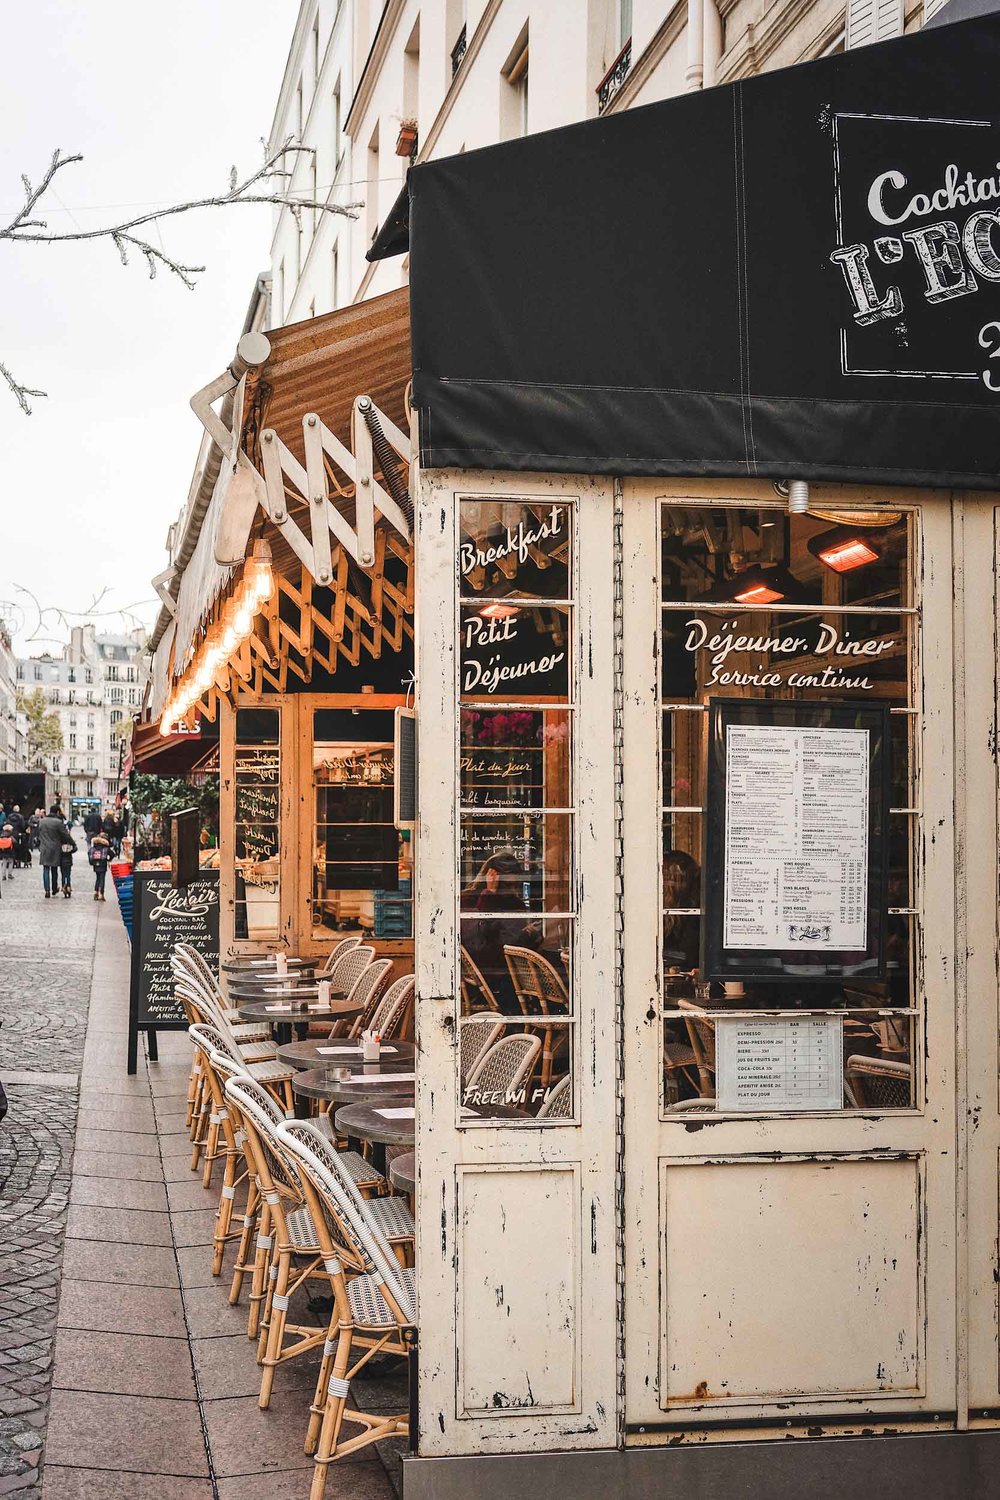 Things you can't miss on your Paris itinerary: stroll through Rue Cler and stop at L'Eclair for cocktails